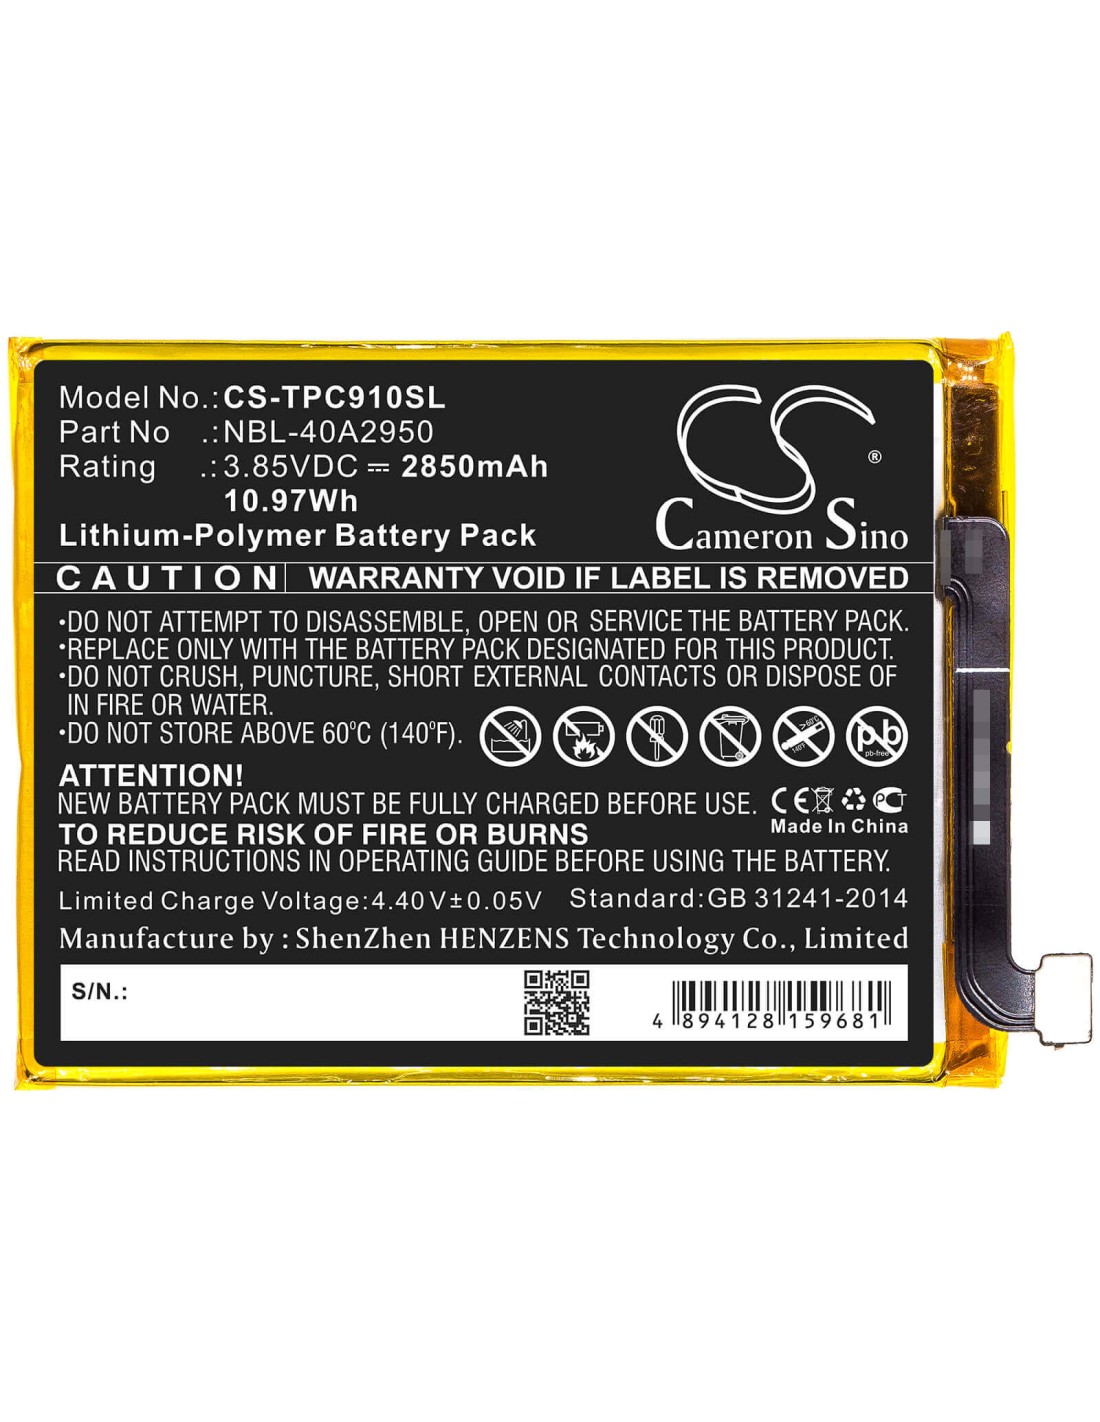 Battery for Neffos, C9 Max, Tp7062, Tp-link 3.85V, 2850mAh - 10.97Wh